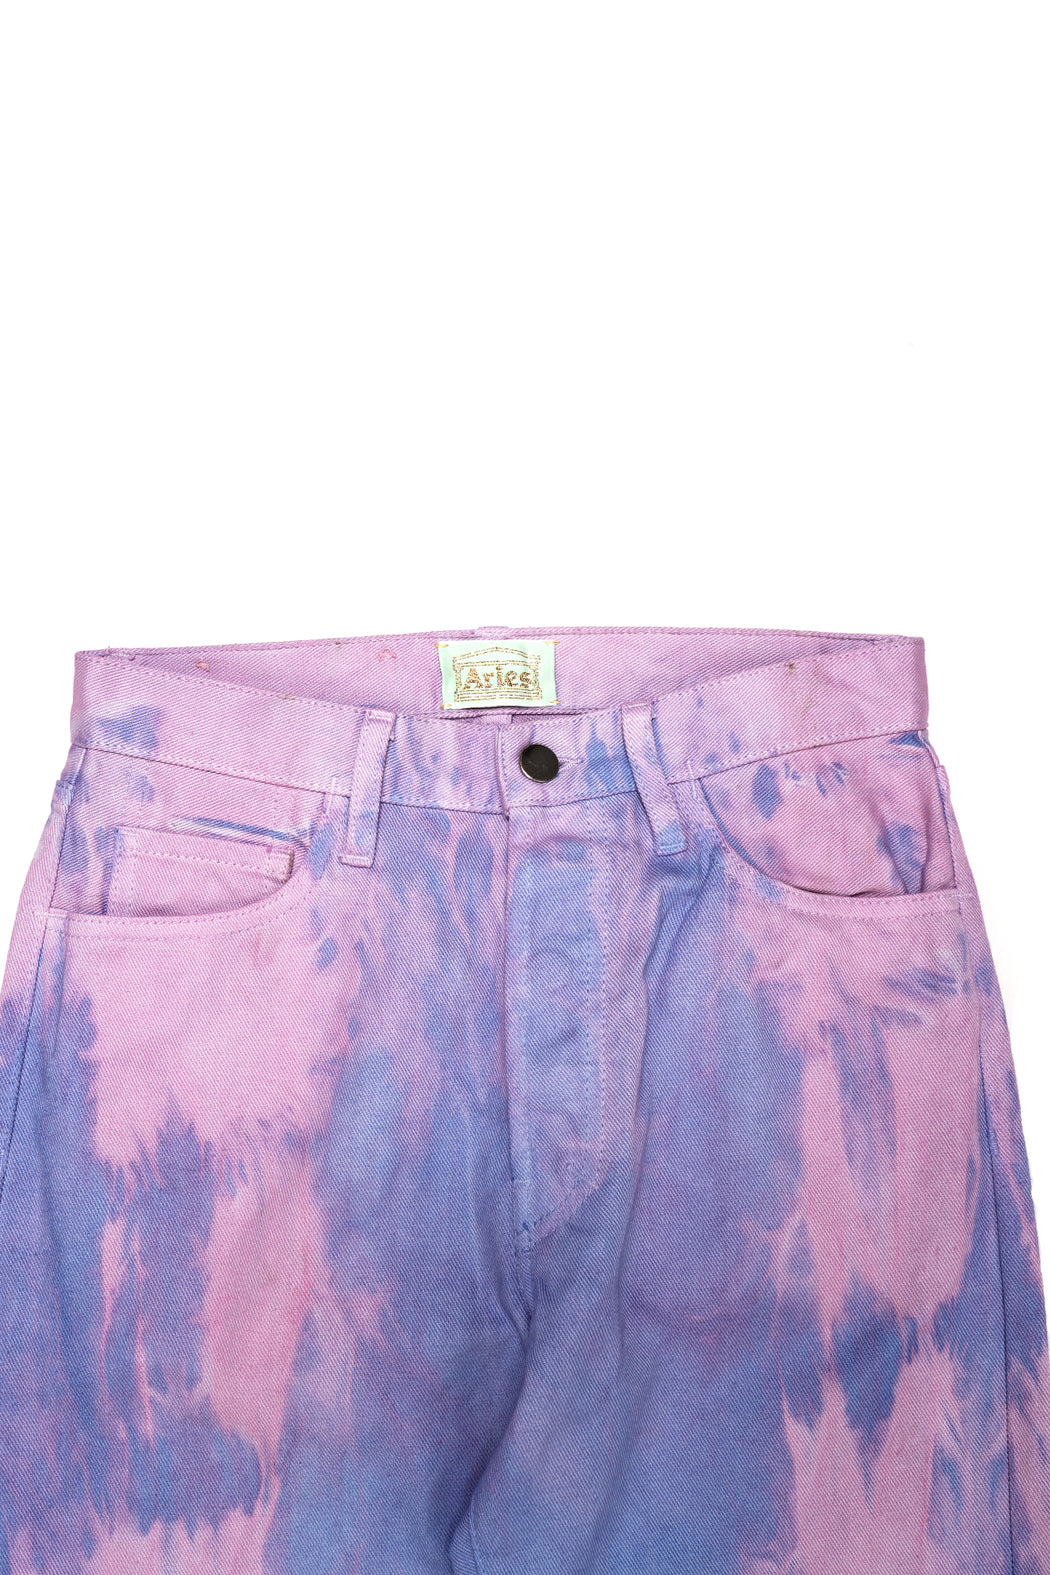 MLP Dyed Lilly Jeans - Lilac